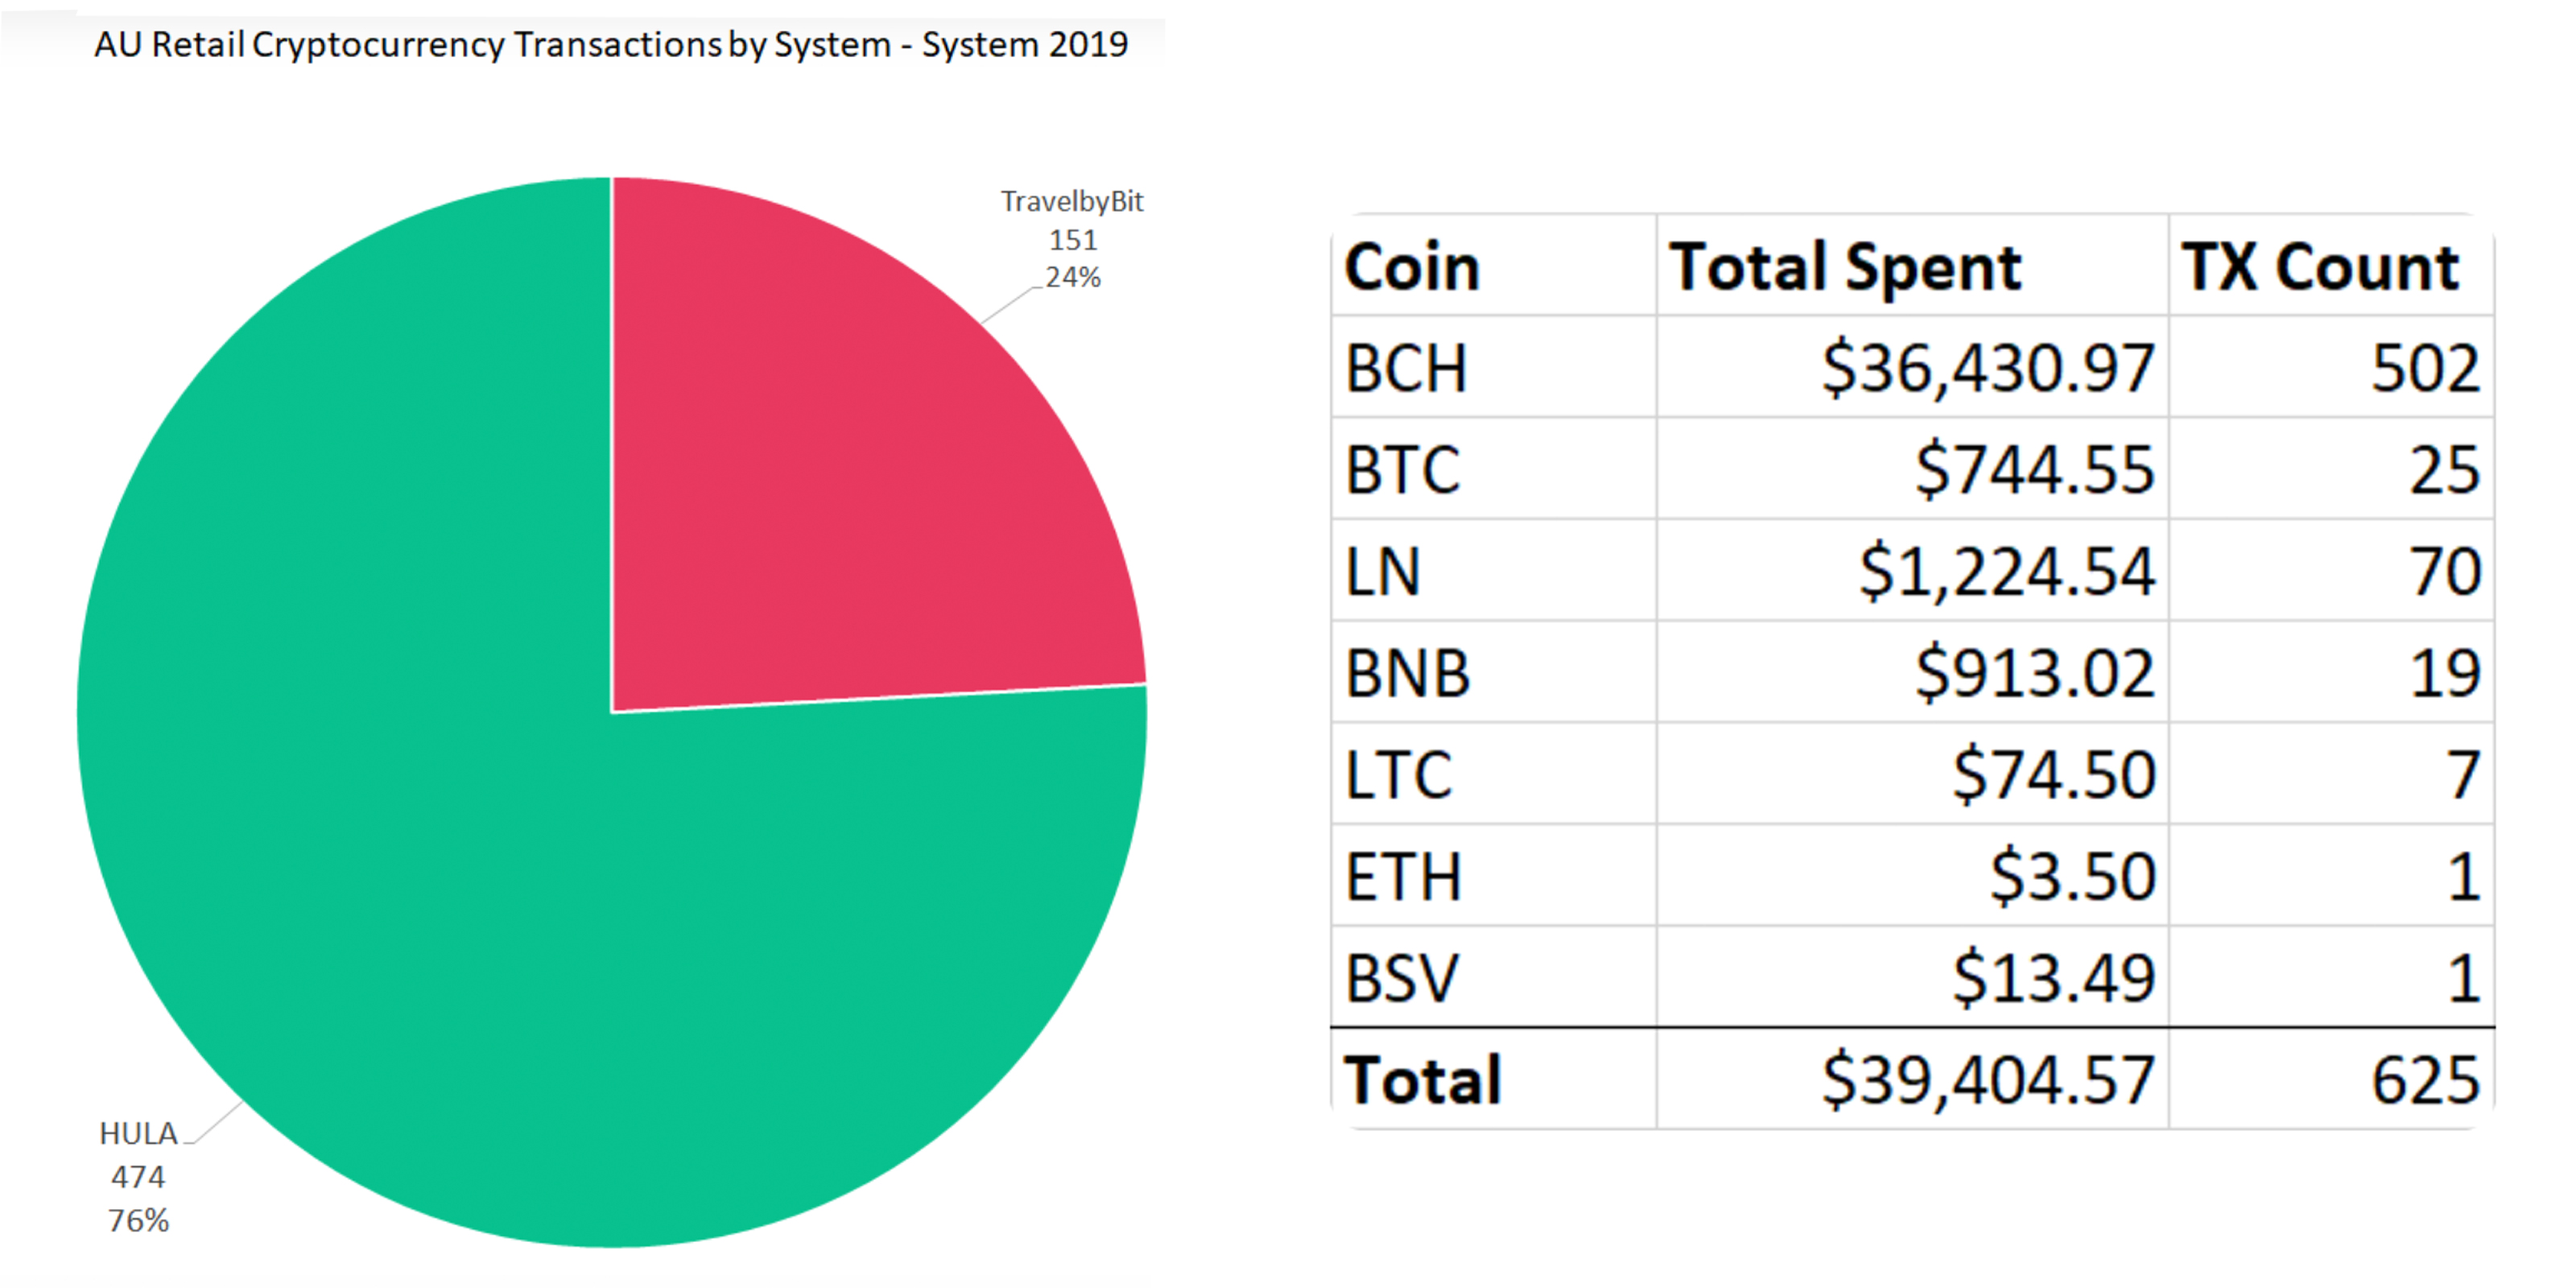 Bitcoin Cash Outshines BTC Retail Spending in Australia by a Wide Margin